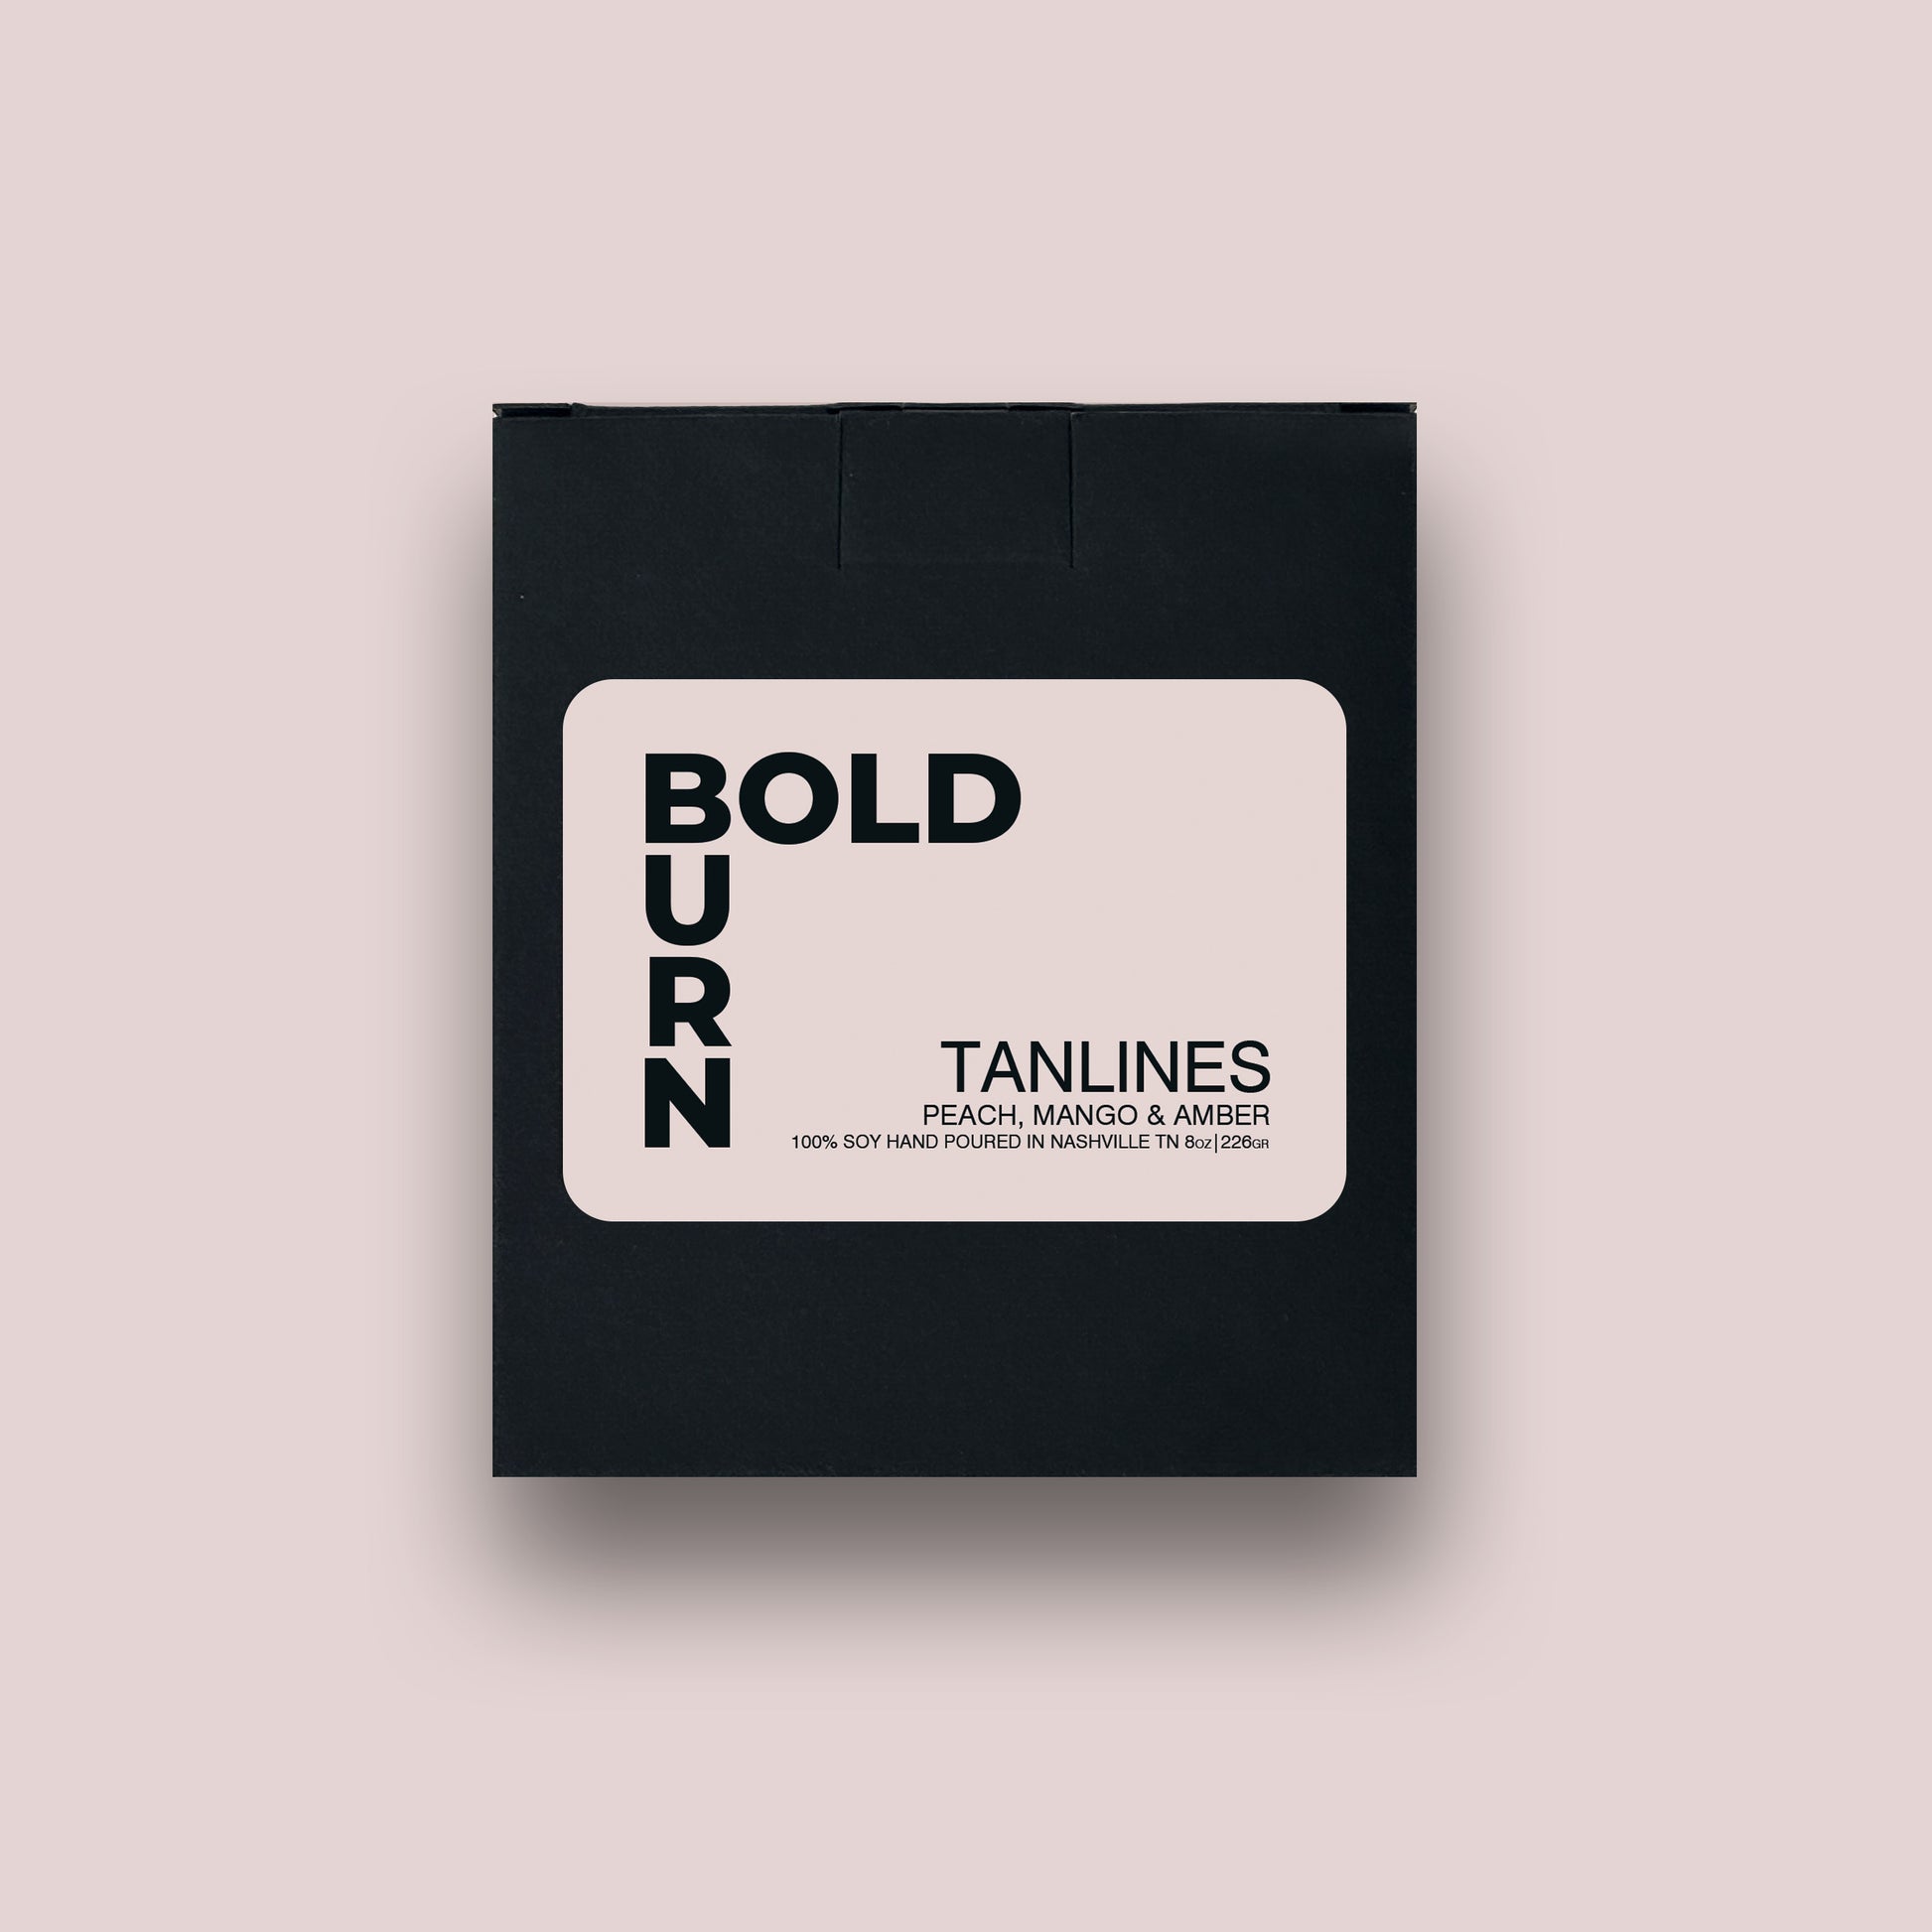 Bold Burn Tanlines black gift box with white label containing Bold Burn logo and product title